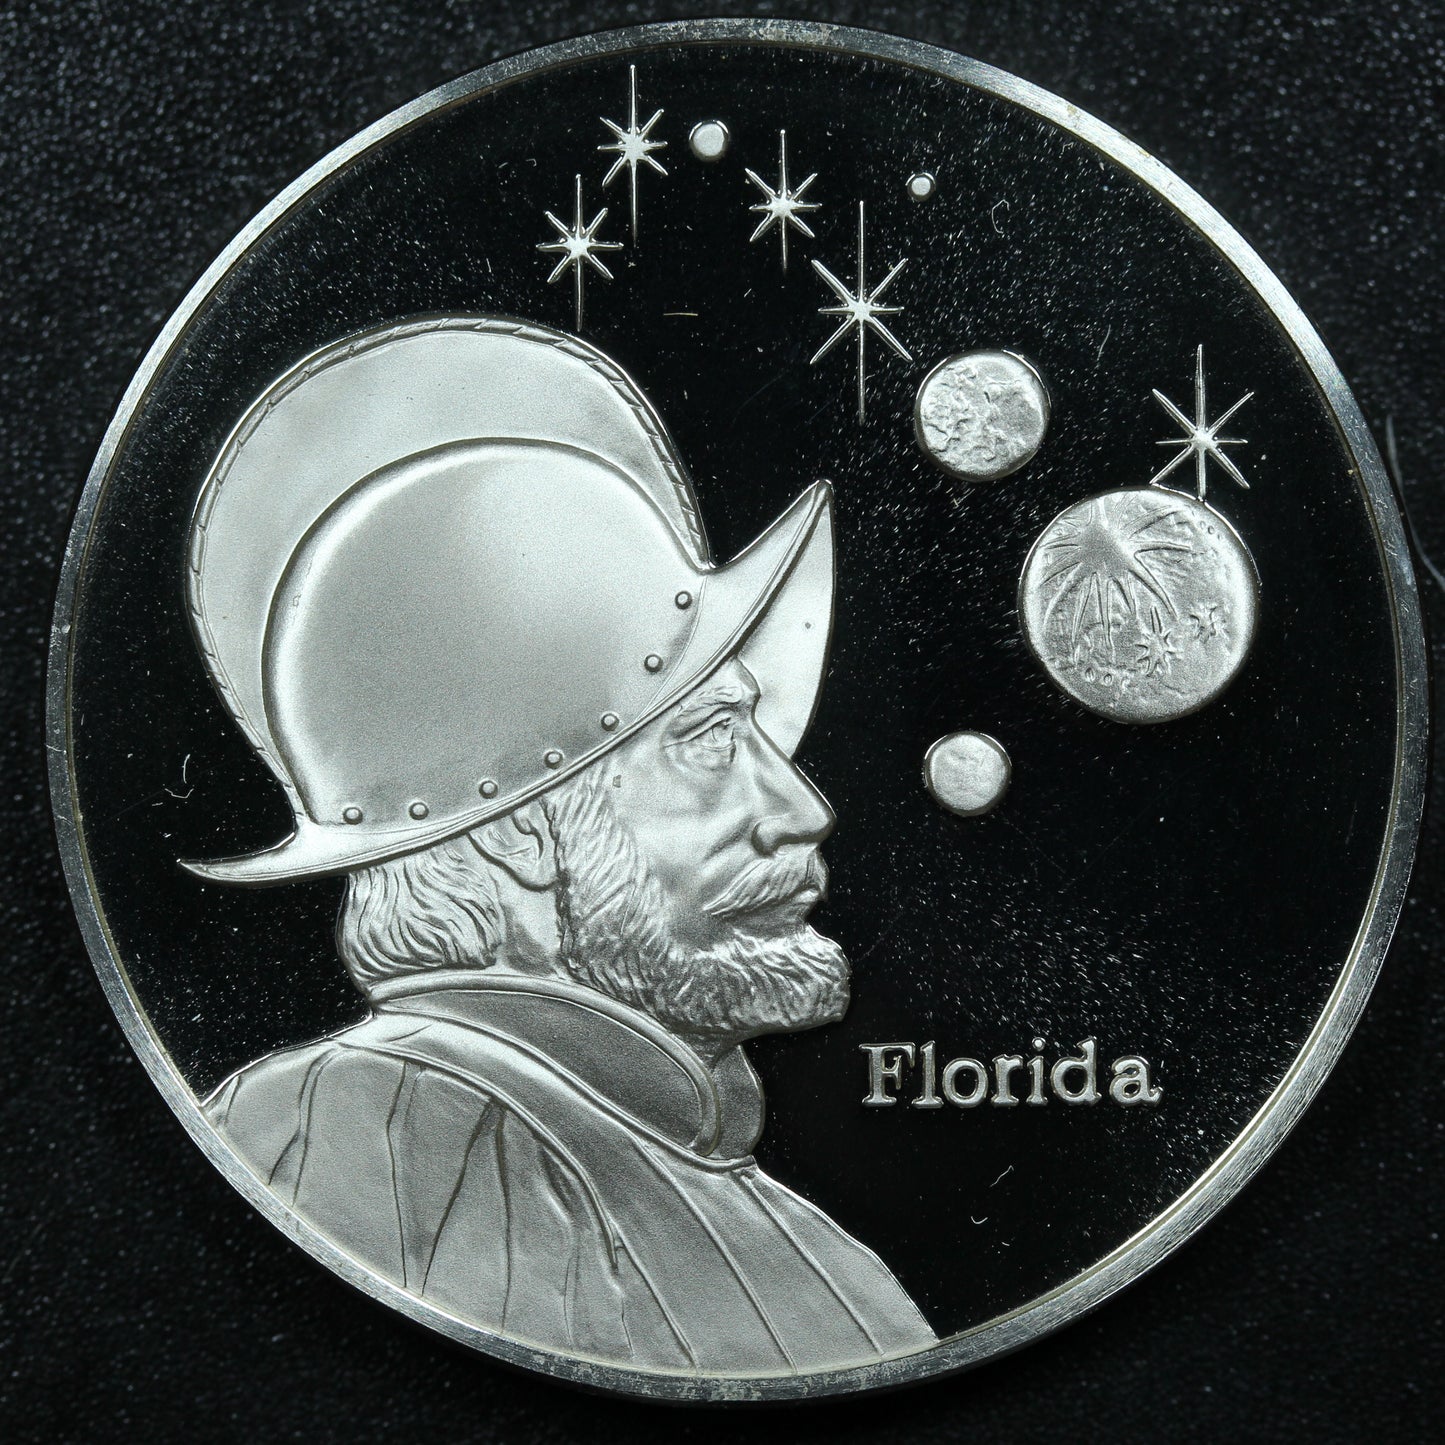 Franklin Mint 50 State Bicentennial Medal - FLORIDA Sterling Silver Proof w/ Capsule